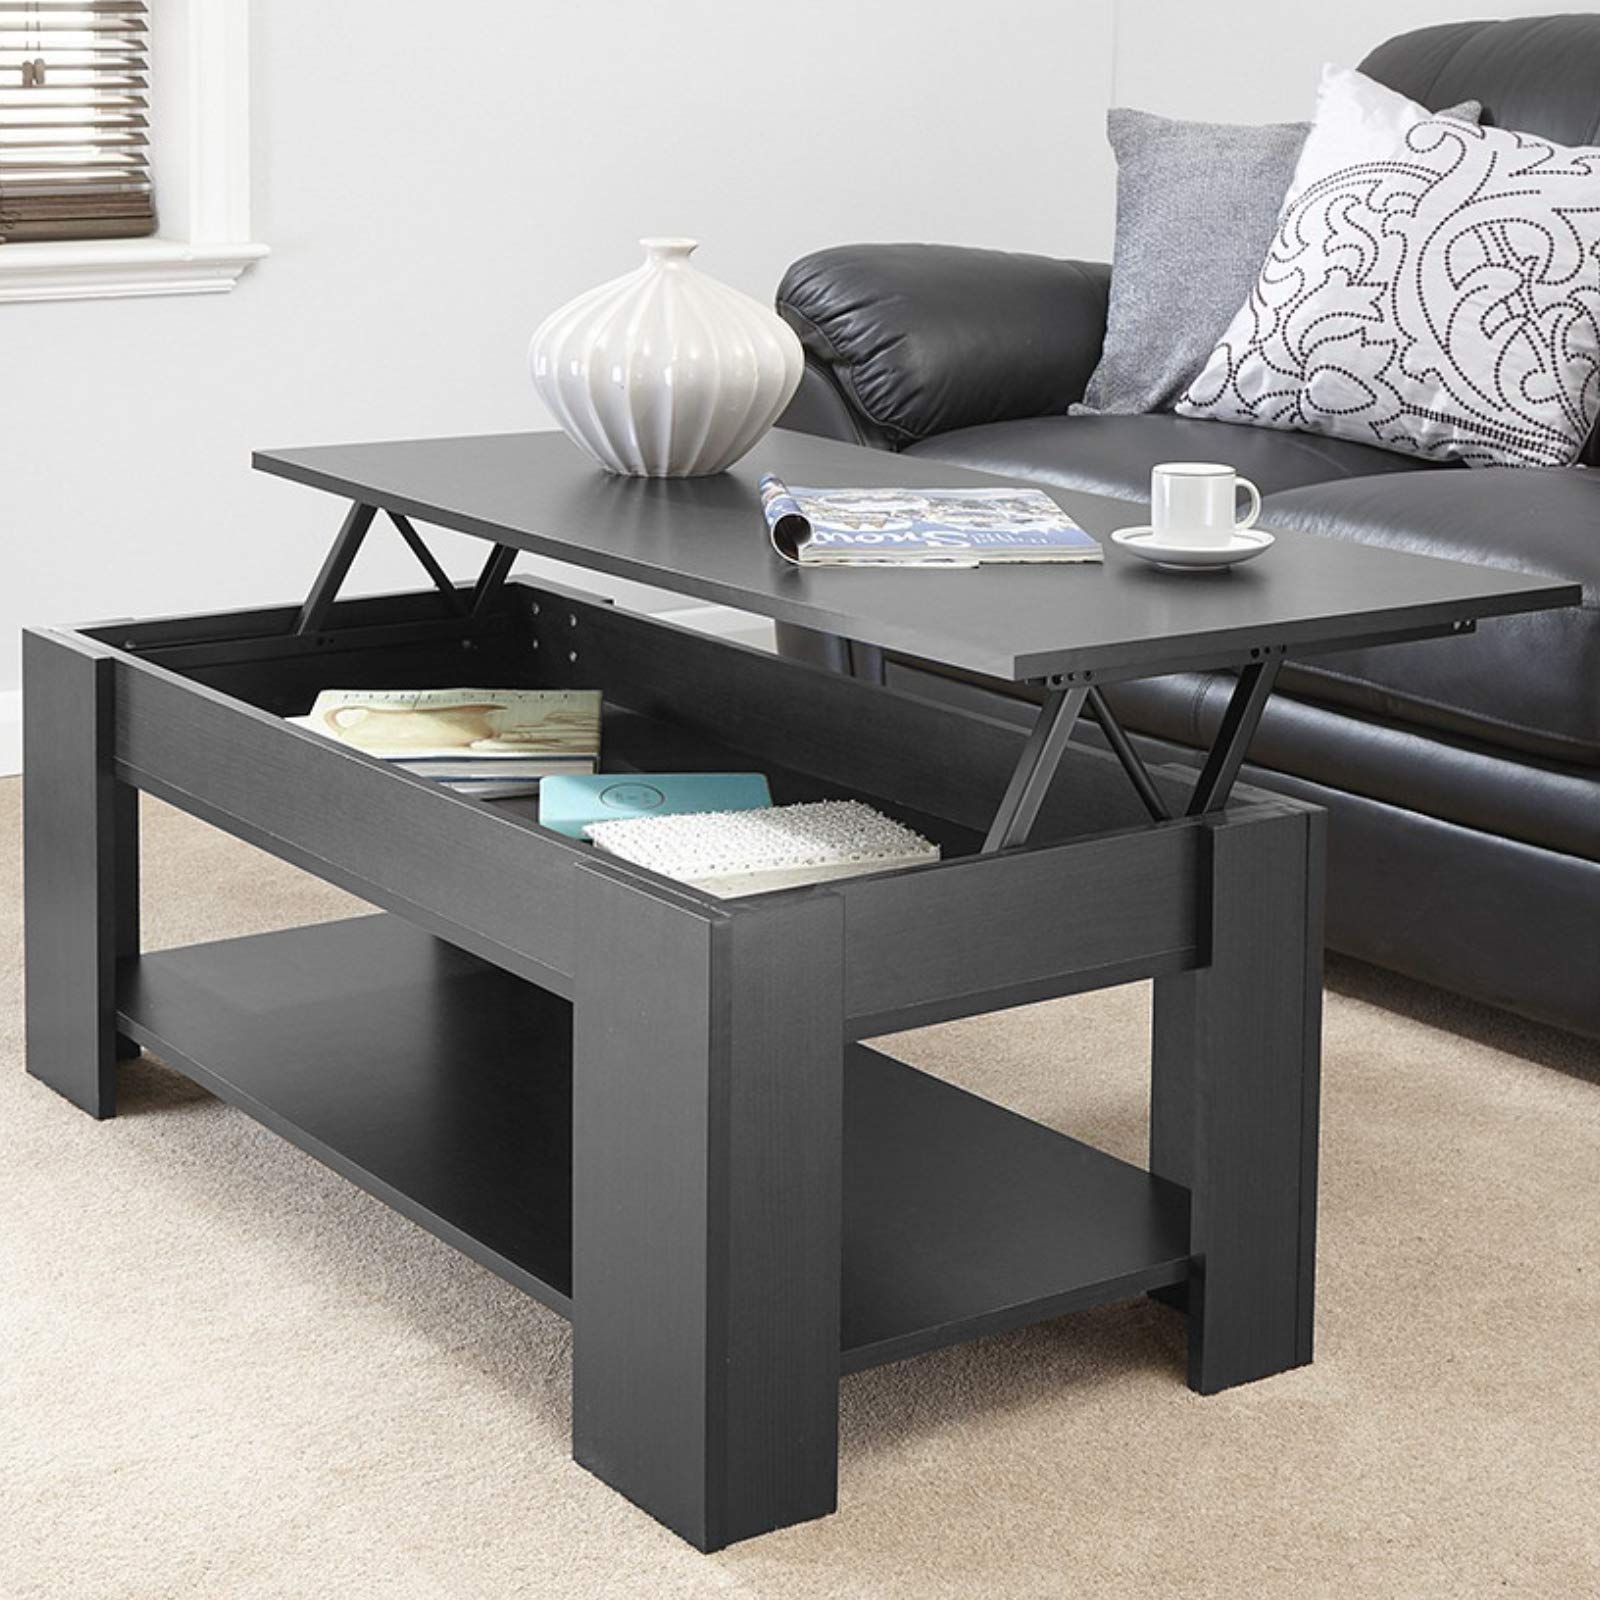 Modern Coffee Tables With Hidden Storage Compartments In Fashionable Buy Coffee Table With Storage Lift Up Coffee Table For Living Room (View 11 of 15)